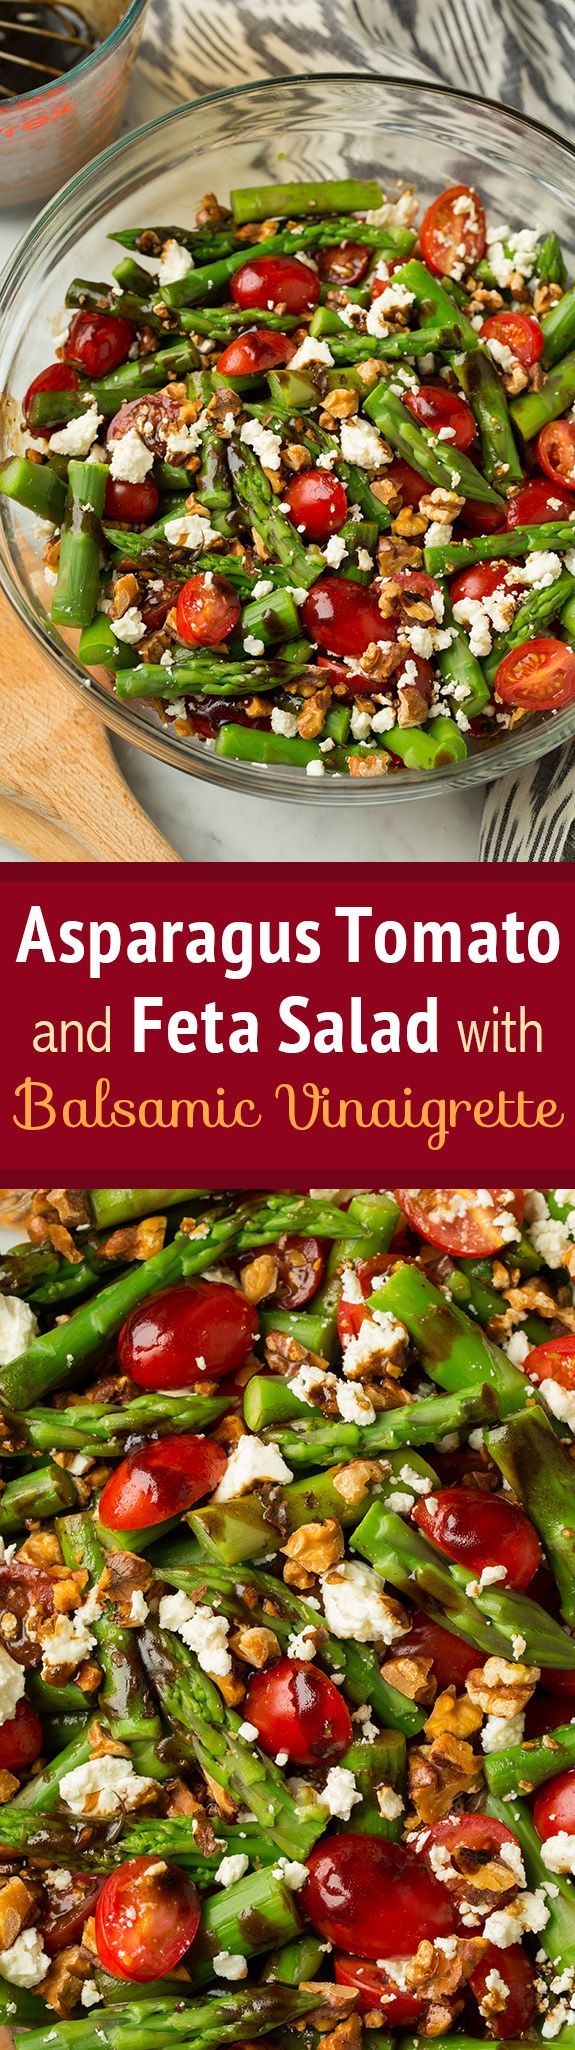 Asparagus, Tomato and Feta Salad with Balsamic Vinaigrette – Best spring salad!! Absolutely loved this